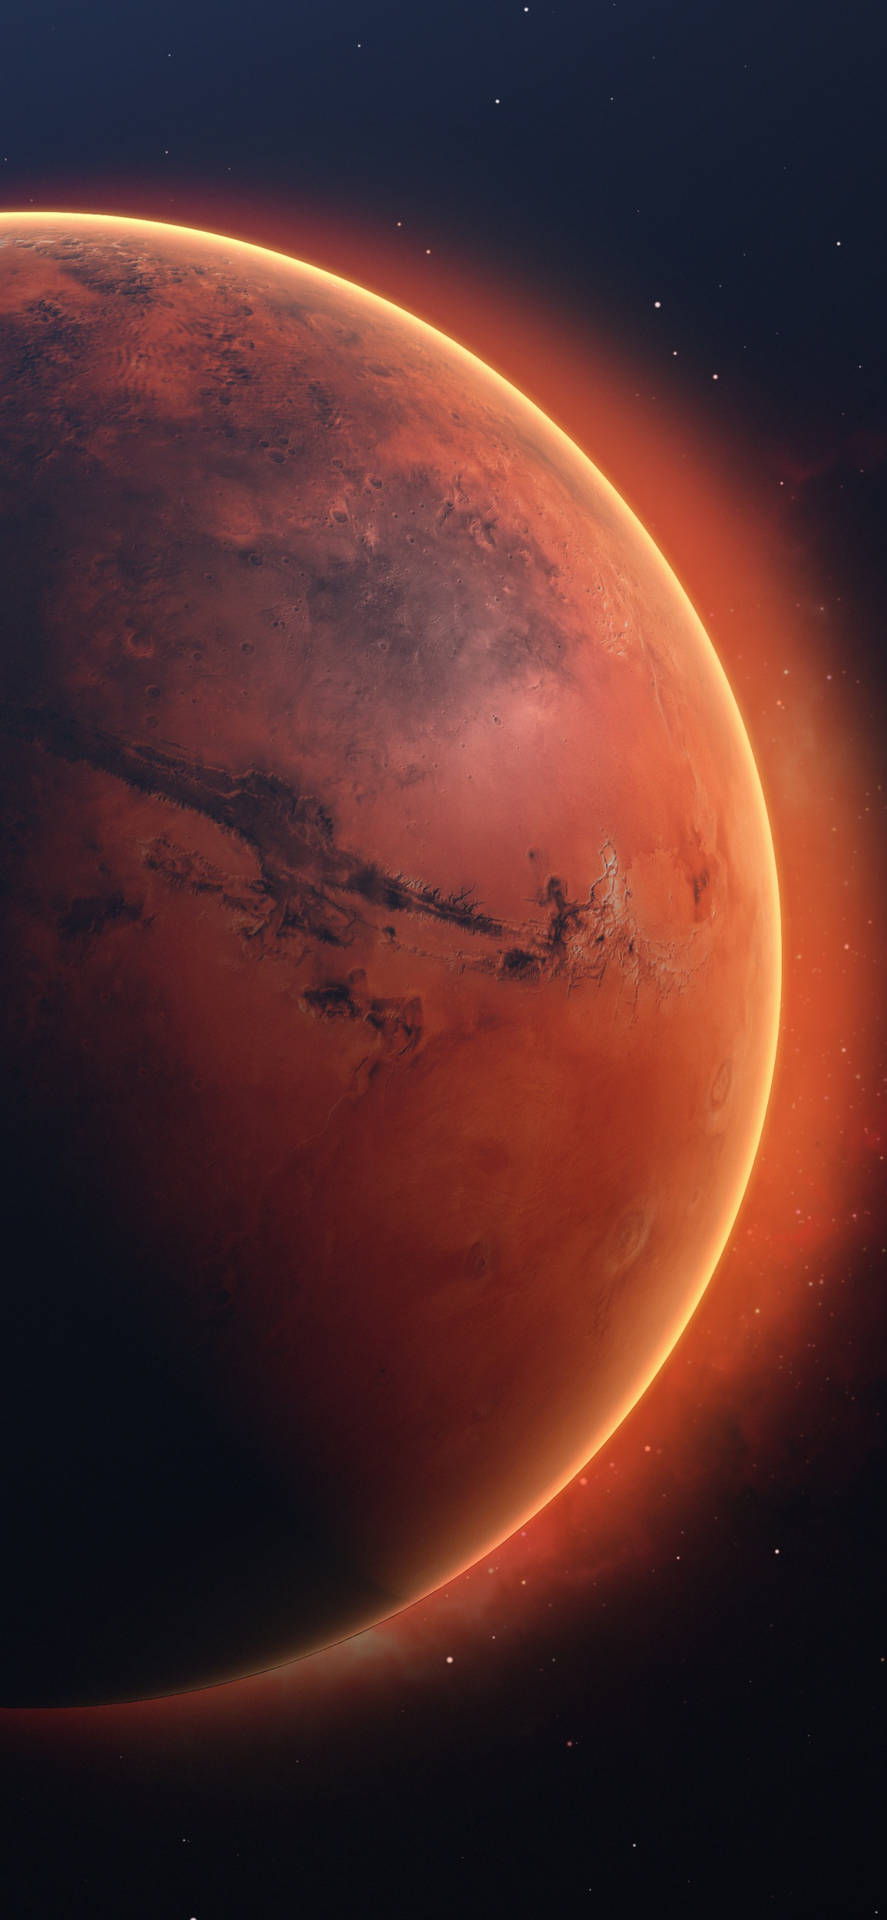 A Planet In Space With A Red Planet In The Background Wallpaper